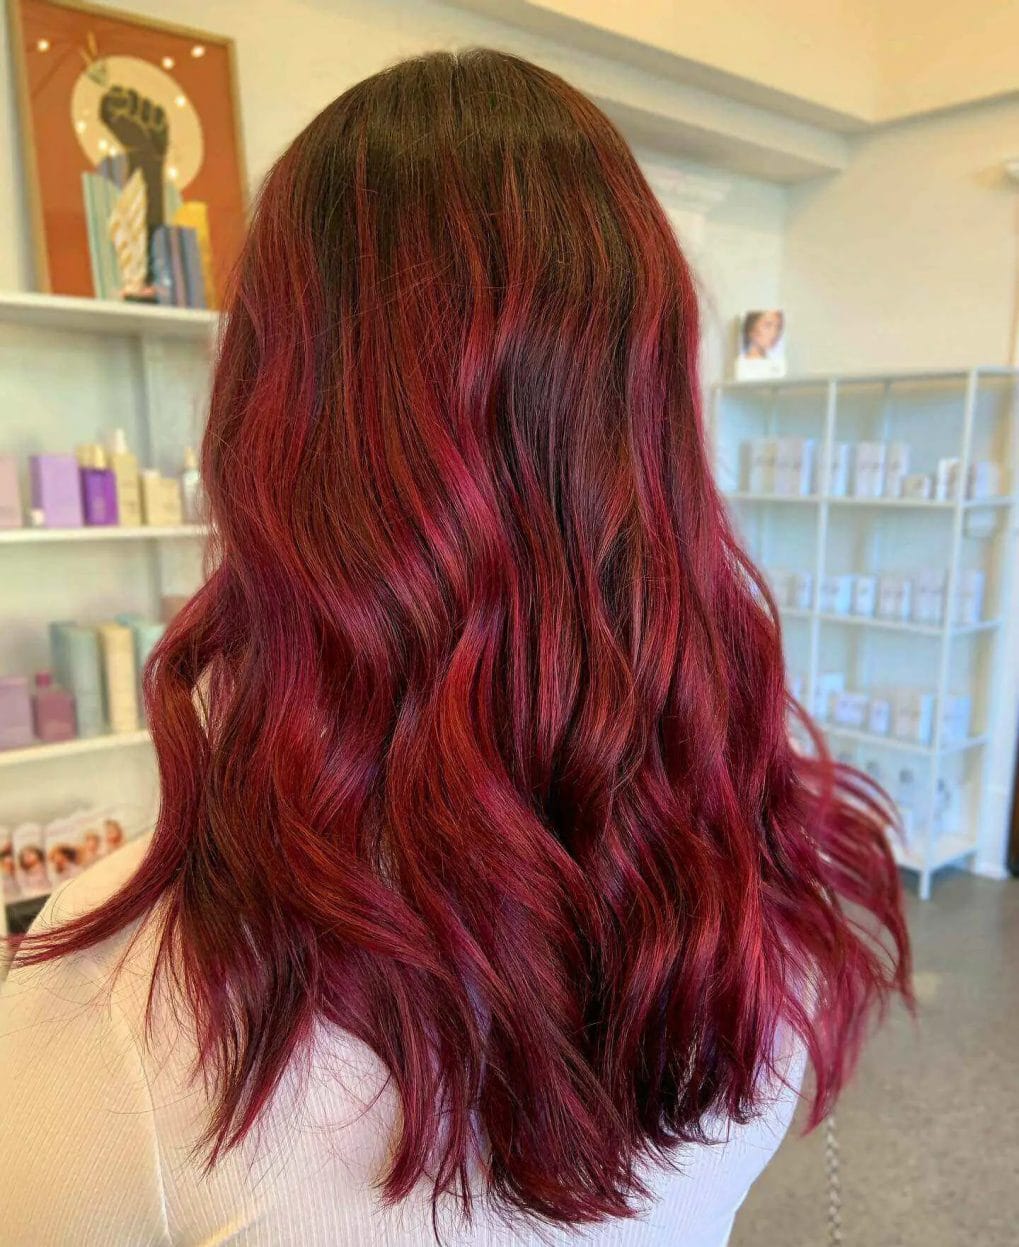 Brunette base to fiery red balayage in long, cascading layers.